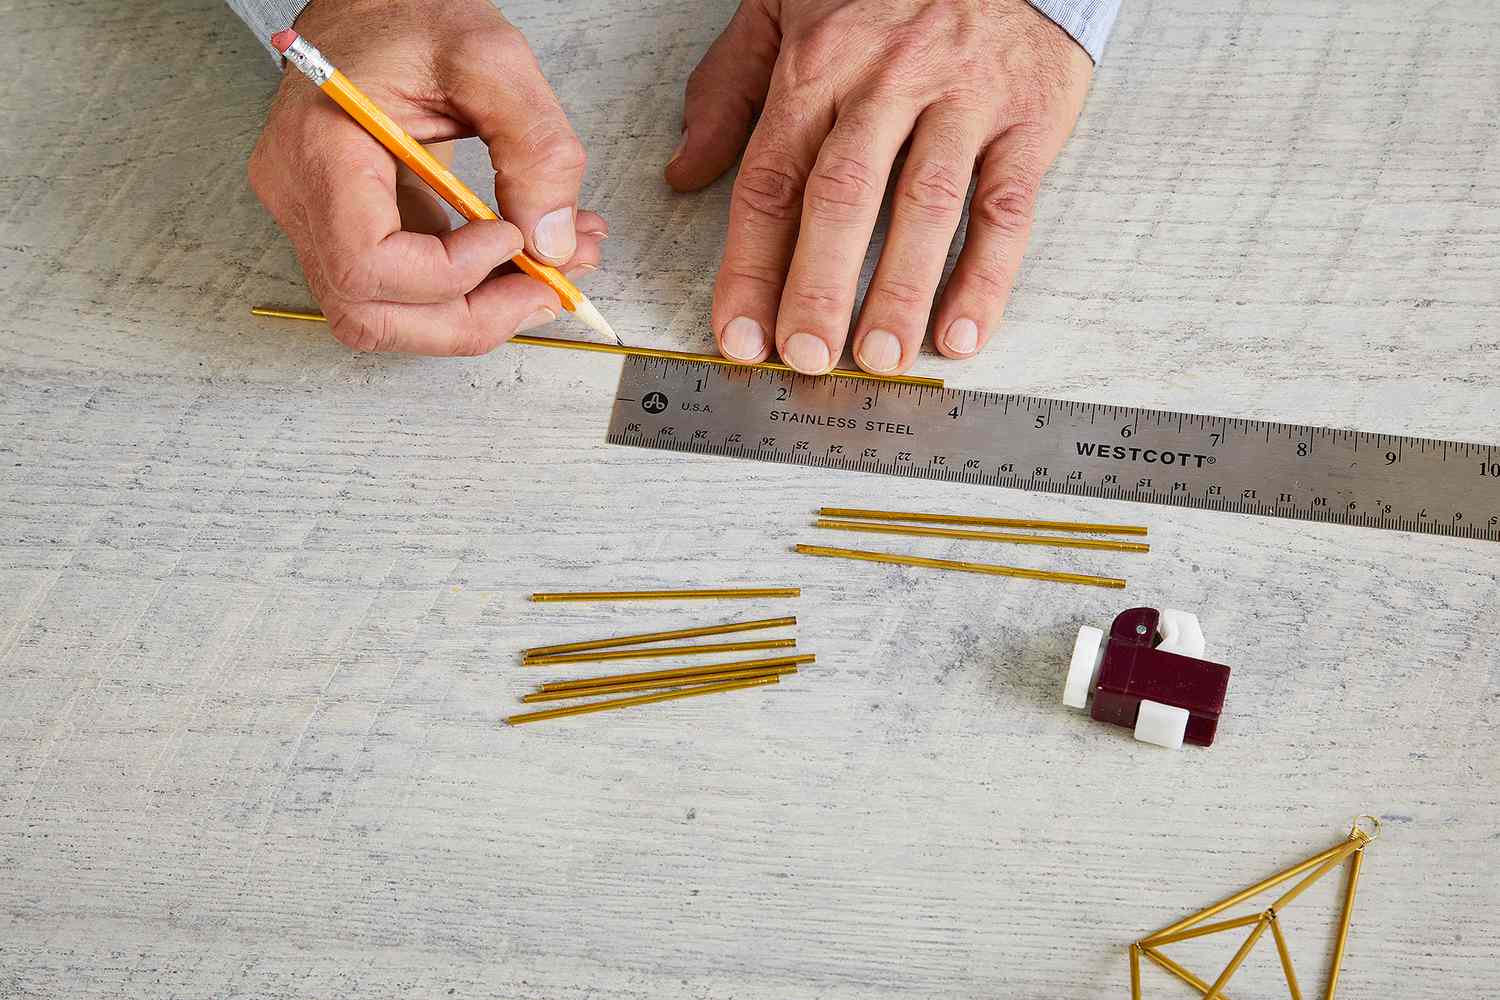 measure and cut six brass tubes lengths